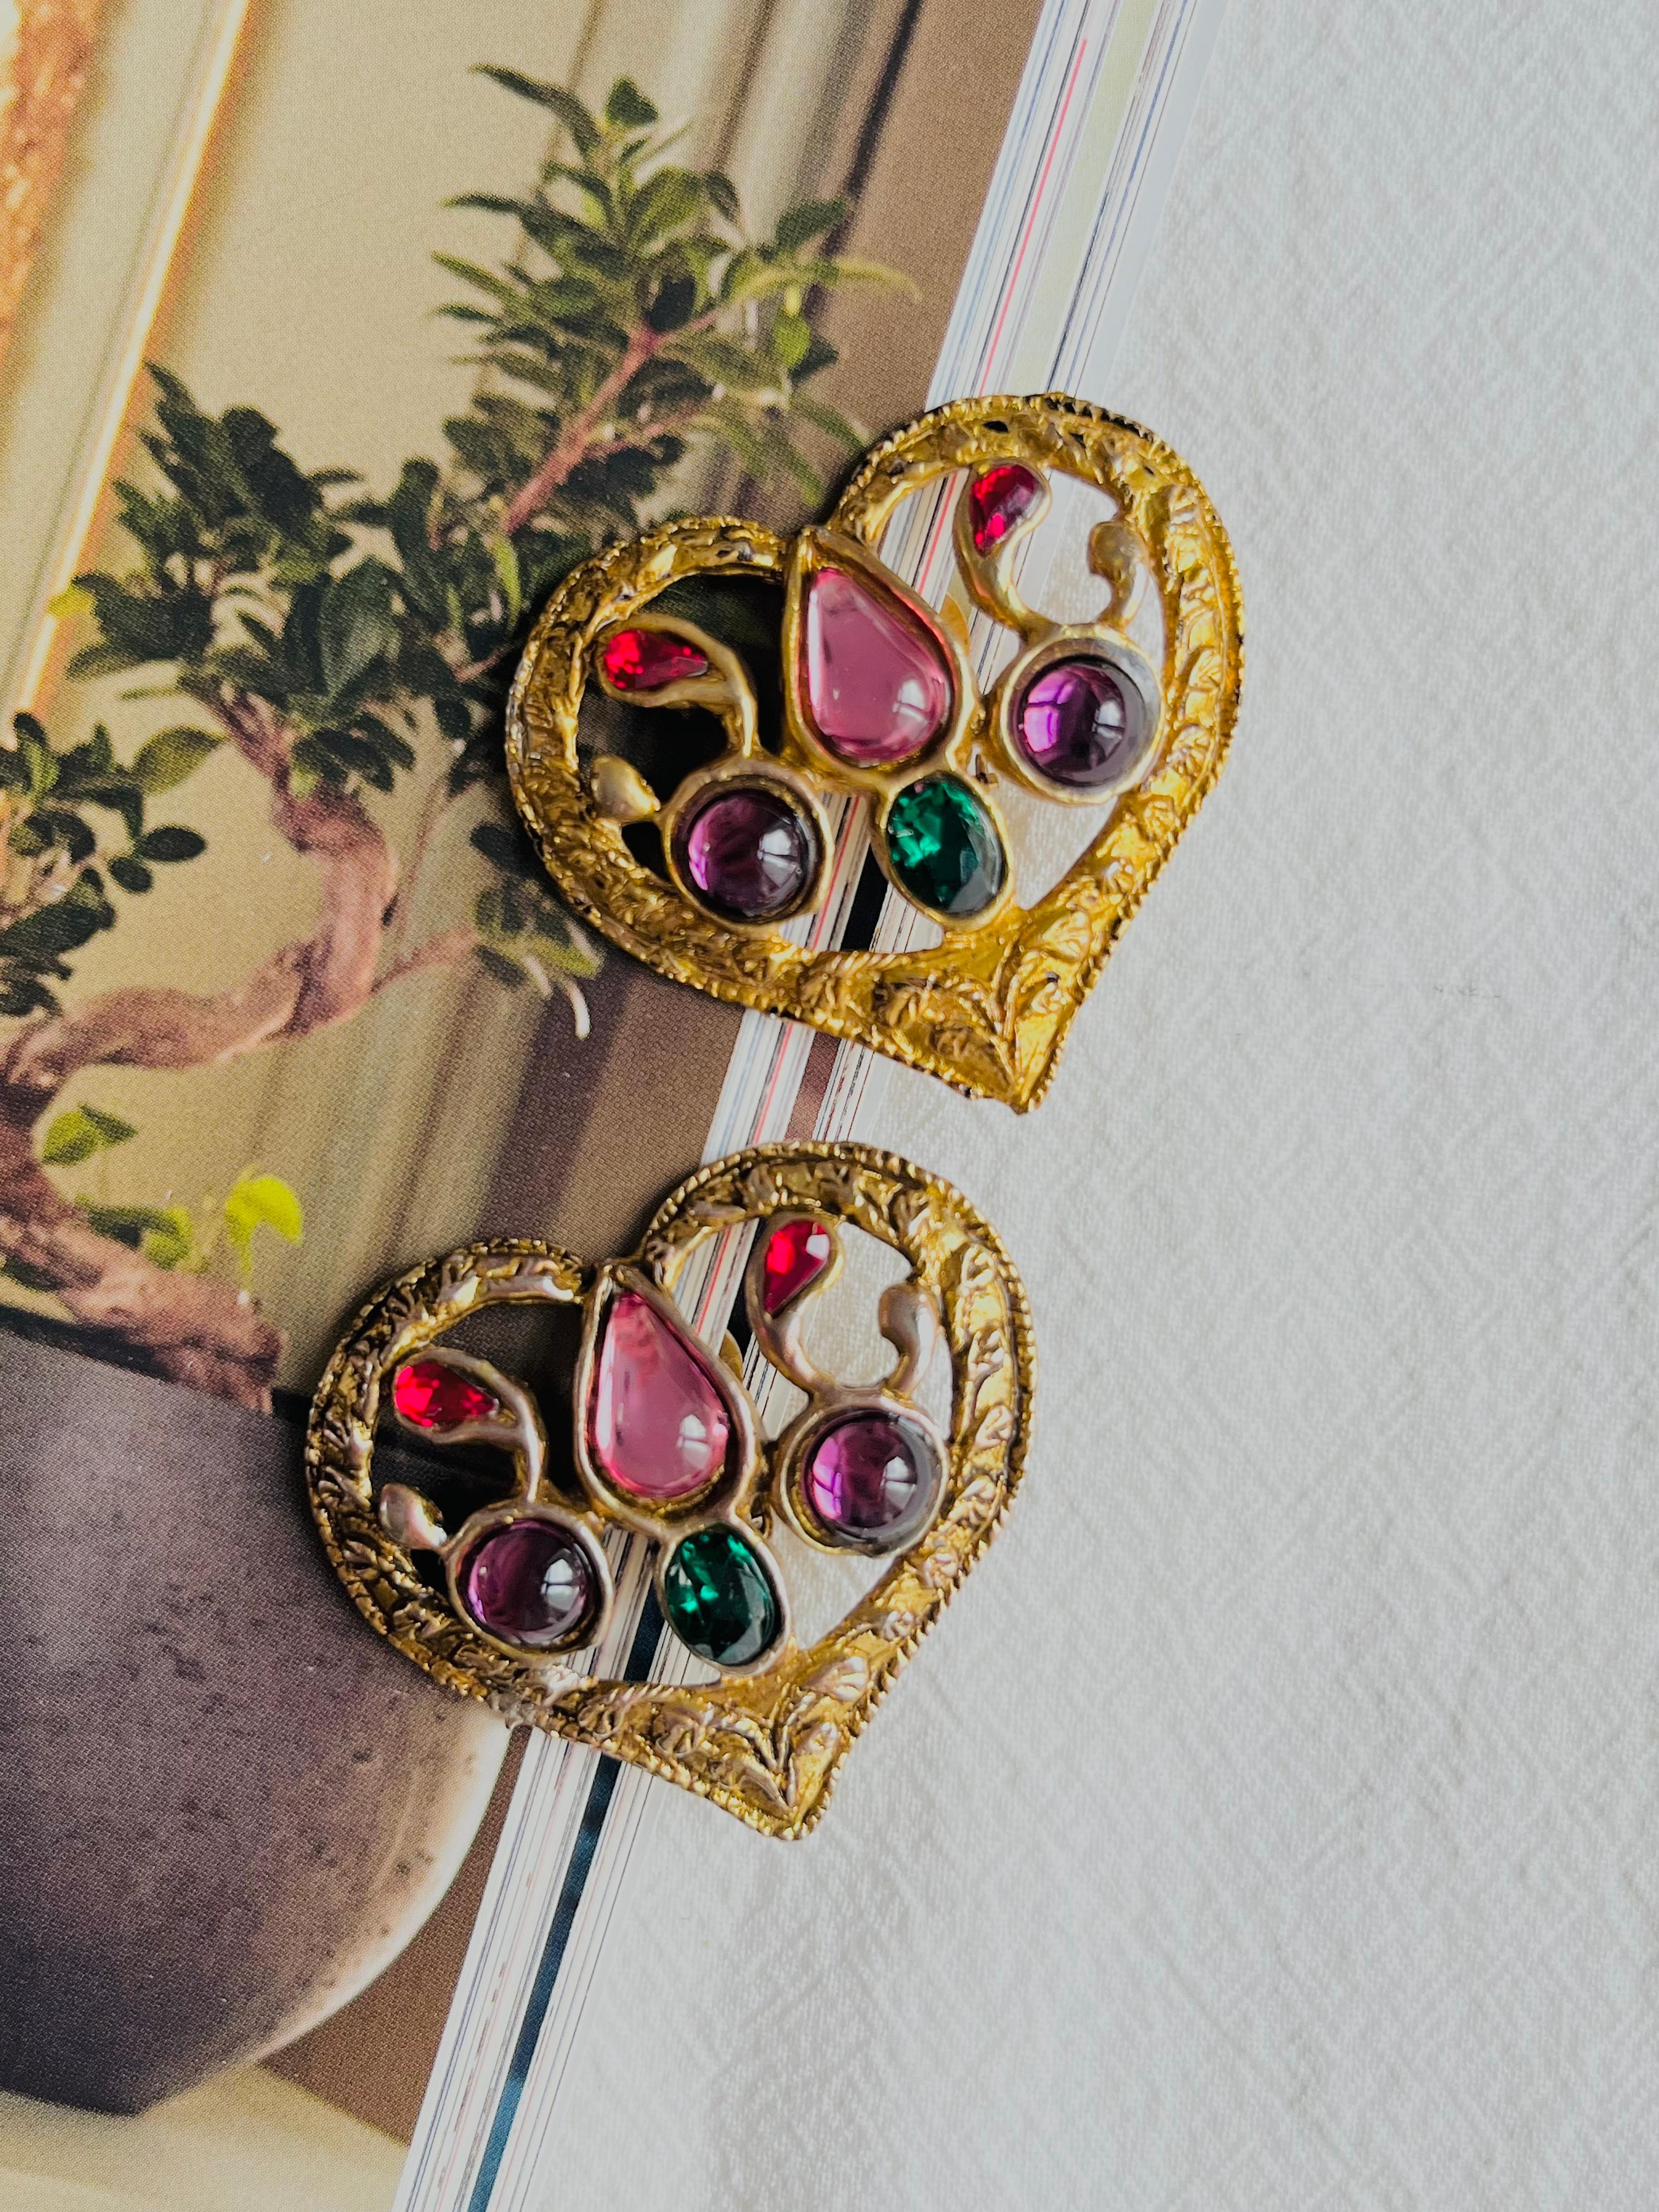 Christian Lacroix Vintage Gripoix Purple Green Red Pink Jelly Belly Cabochon Crystals Openwork Heart Chunky Clip Earrings, Gold Tone

Good condition. Light scratches or colour loss. 100% Genuine. 

Signed at the back. Rare to find.

Size: 4.6*4.6